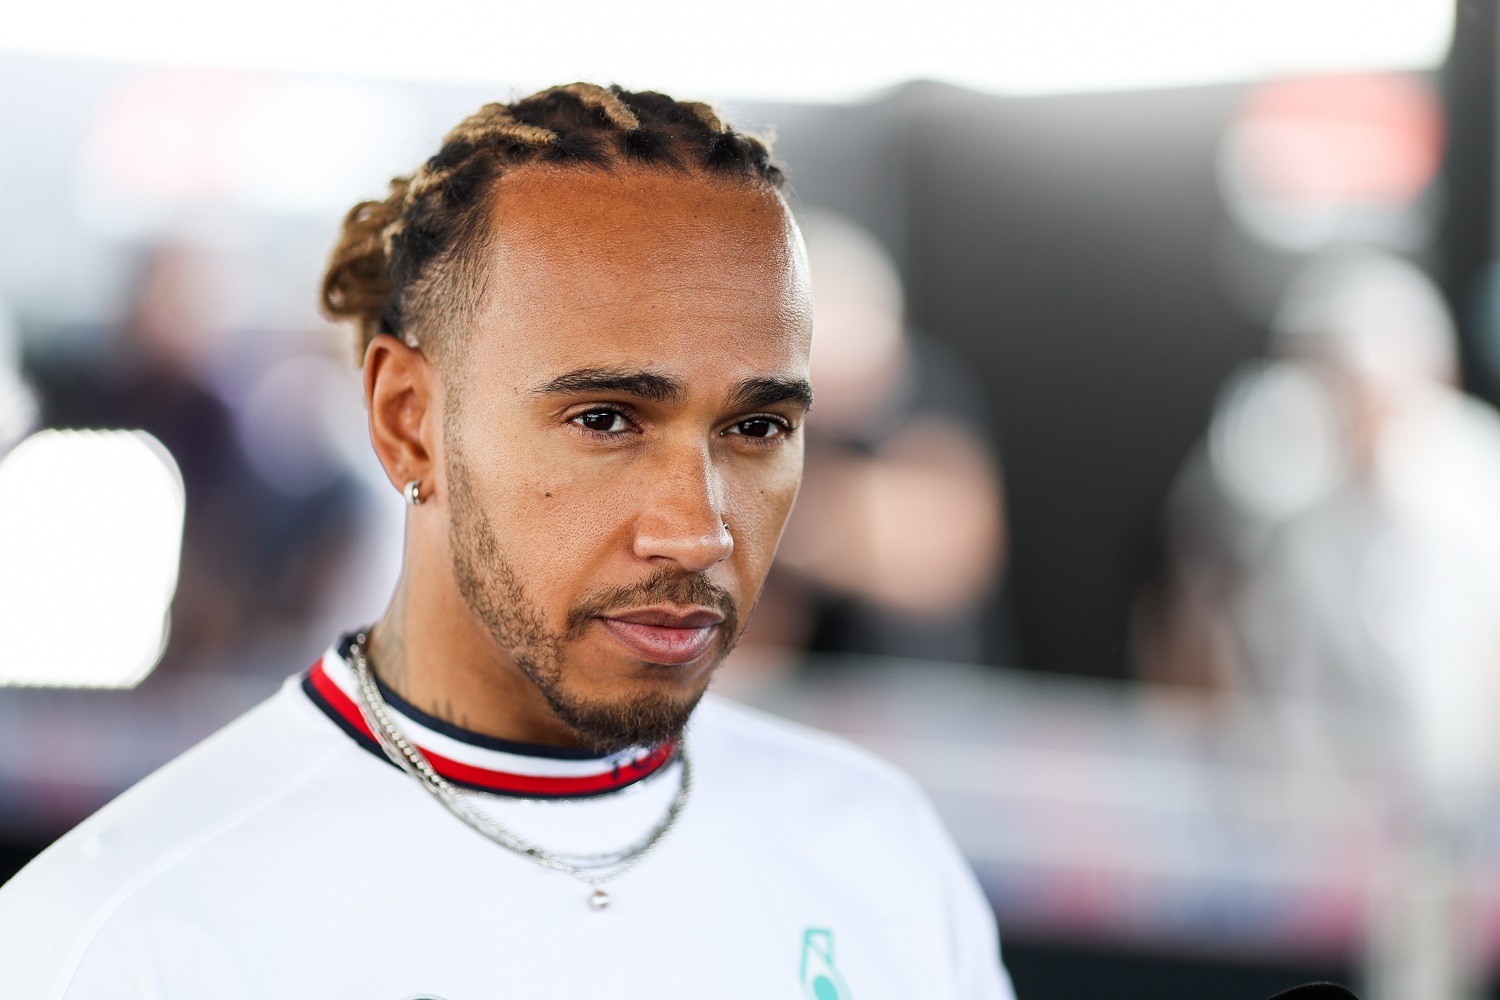 Lewis Hamilton during practice ahead of the Grand Prix of Canada at Circuit Gilles Villeneuve on June 17, 2022 in Montreal.